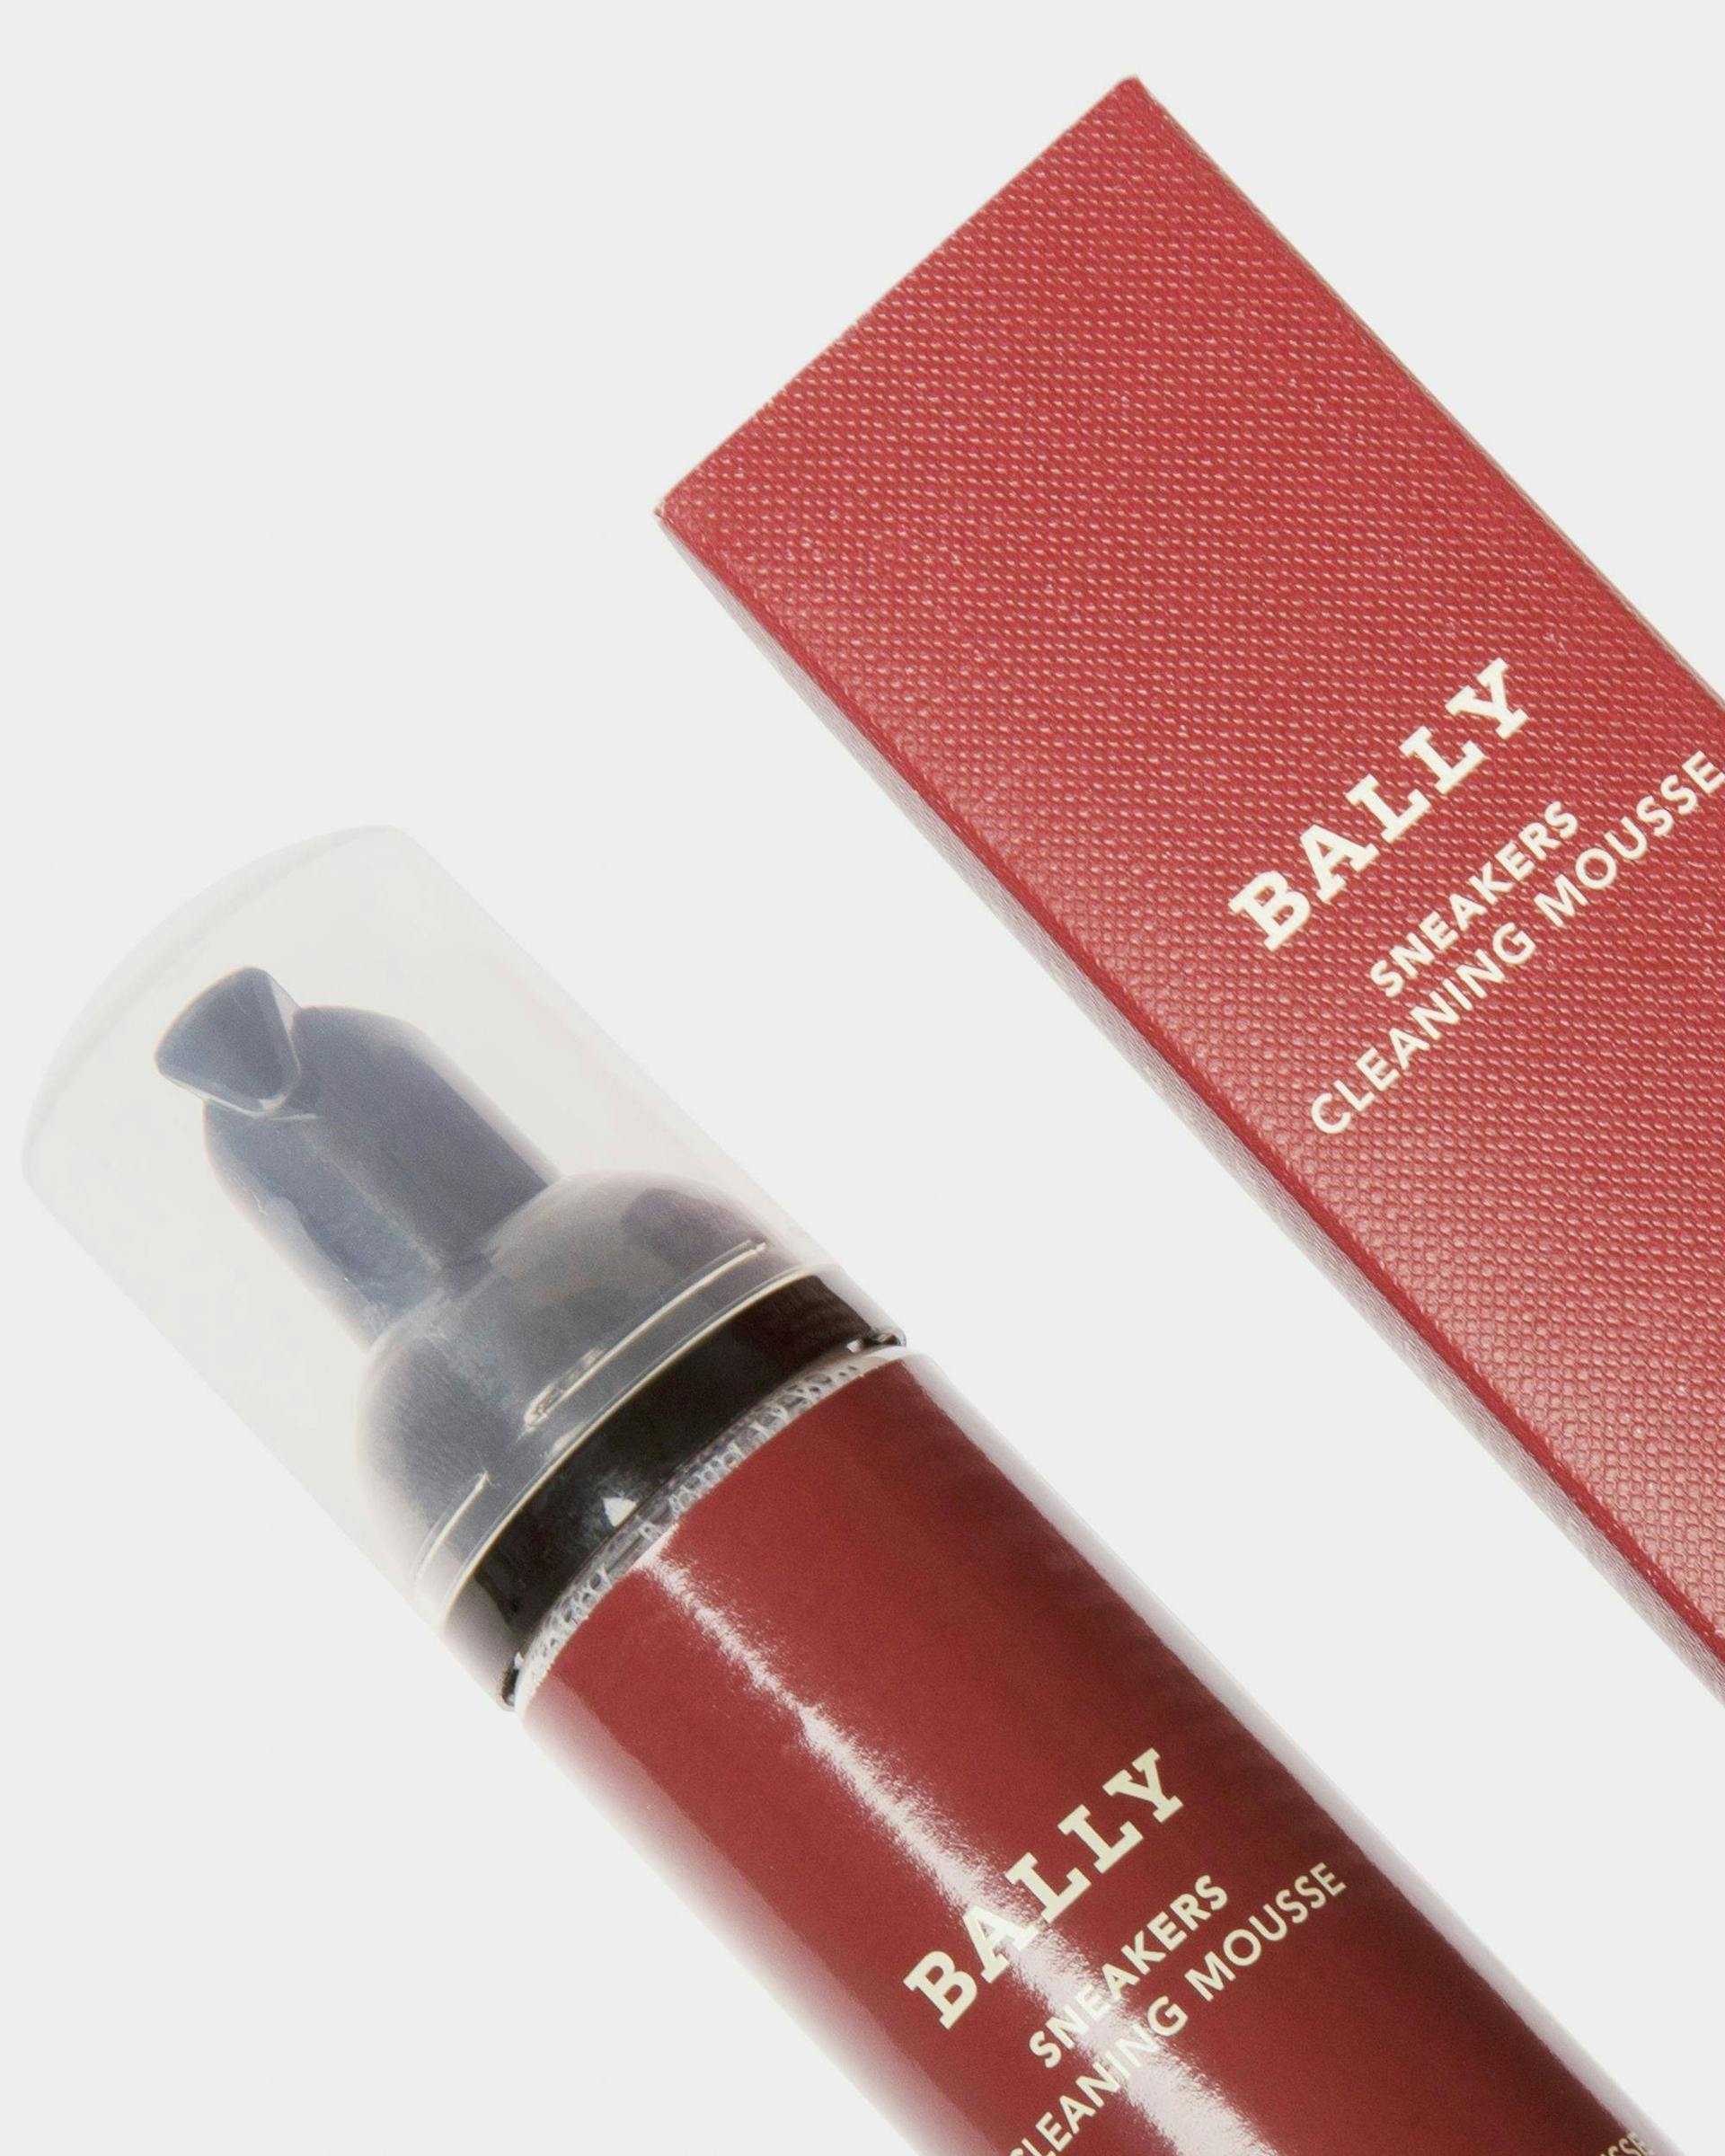 Sneakers Cleaning Mousse Shoe Care Accessory For All Shoes - Men's - Bally - 02